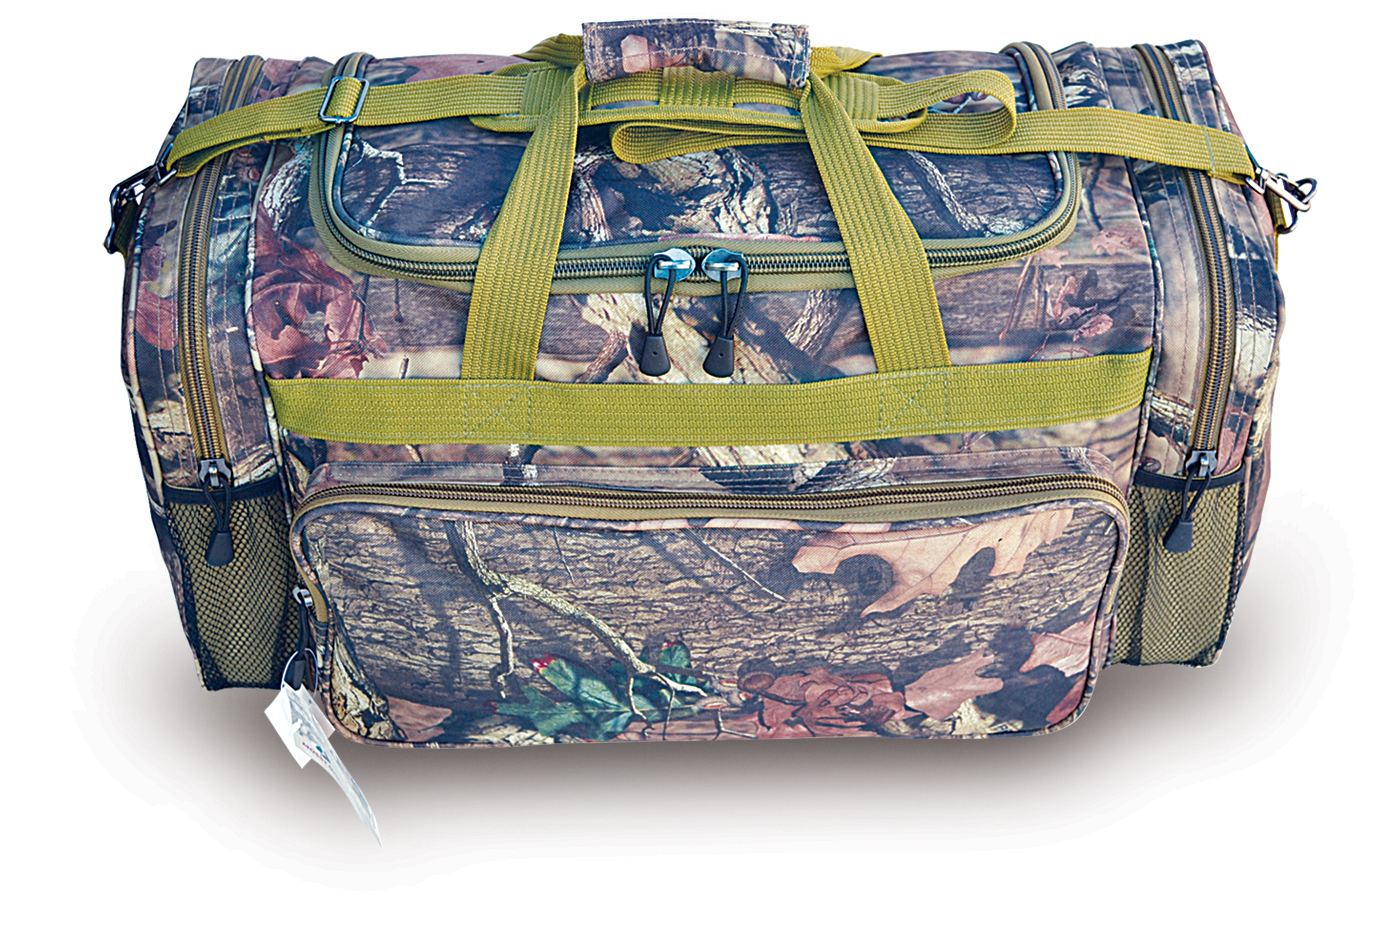 Mossy Oak bags luggage, (no realtree) backpacks hunting camo bag Explorer Brand, Gear bag, range bag, travel bag gun pouch, backpack, for hunting, outdoor, every day carry gun case, messenger bag